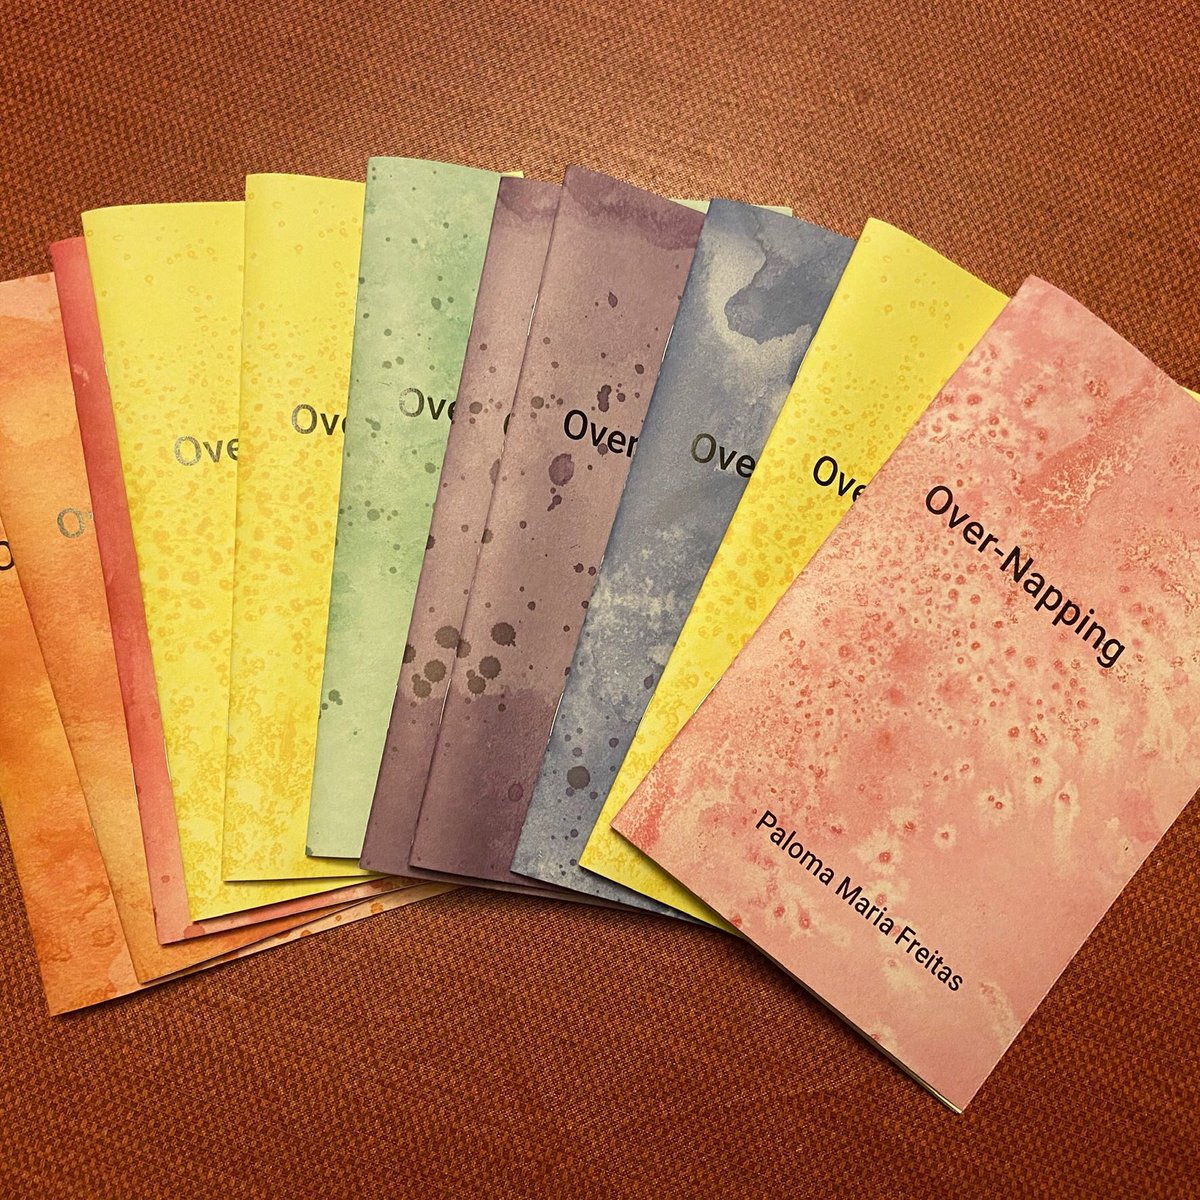 My first chapbook “Over-Napping” is a quirky exploration into my personal world of joy-fill nihilism #WritingCommunity #poetry #chapbook #poetrychapbook